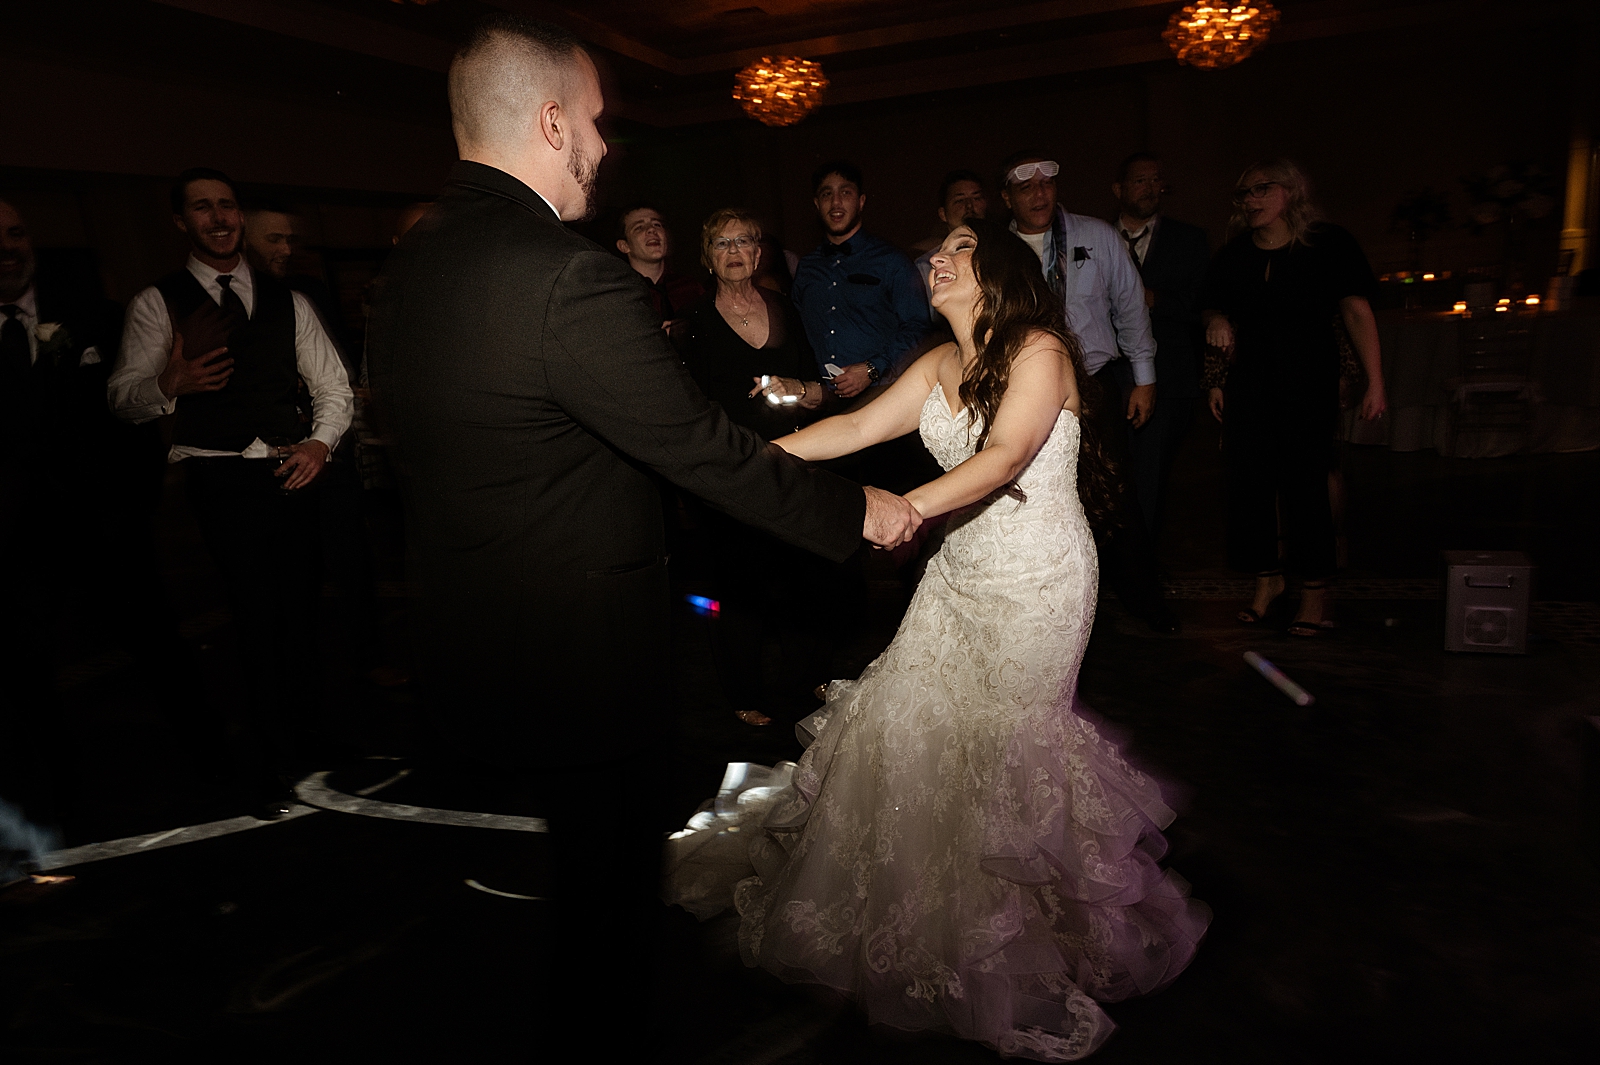 Bride and Groom dancing at the reception together